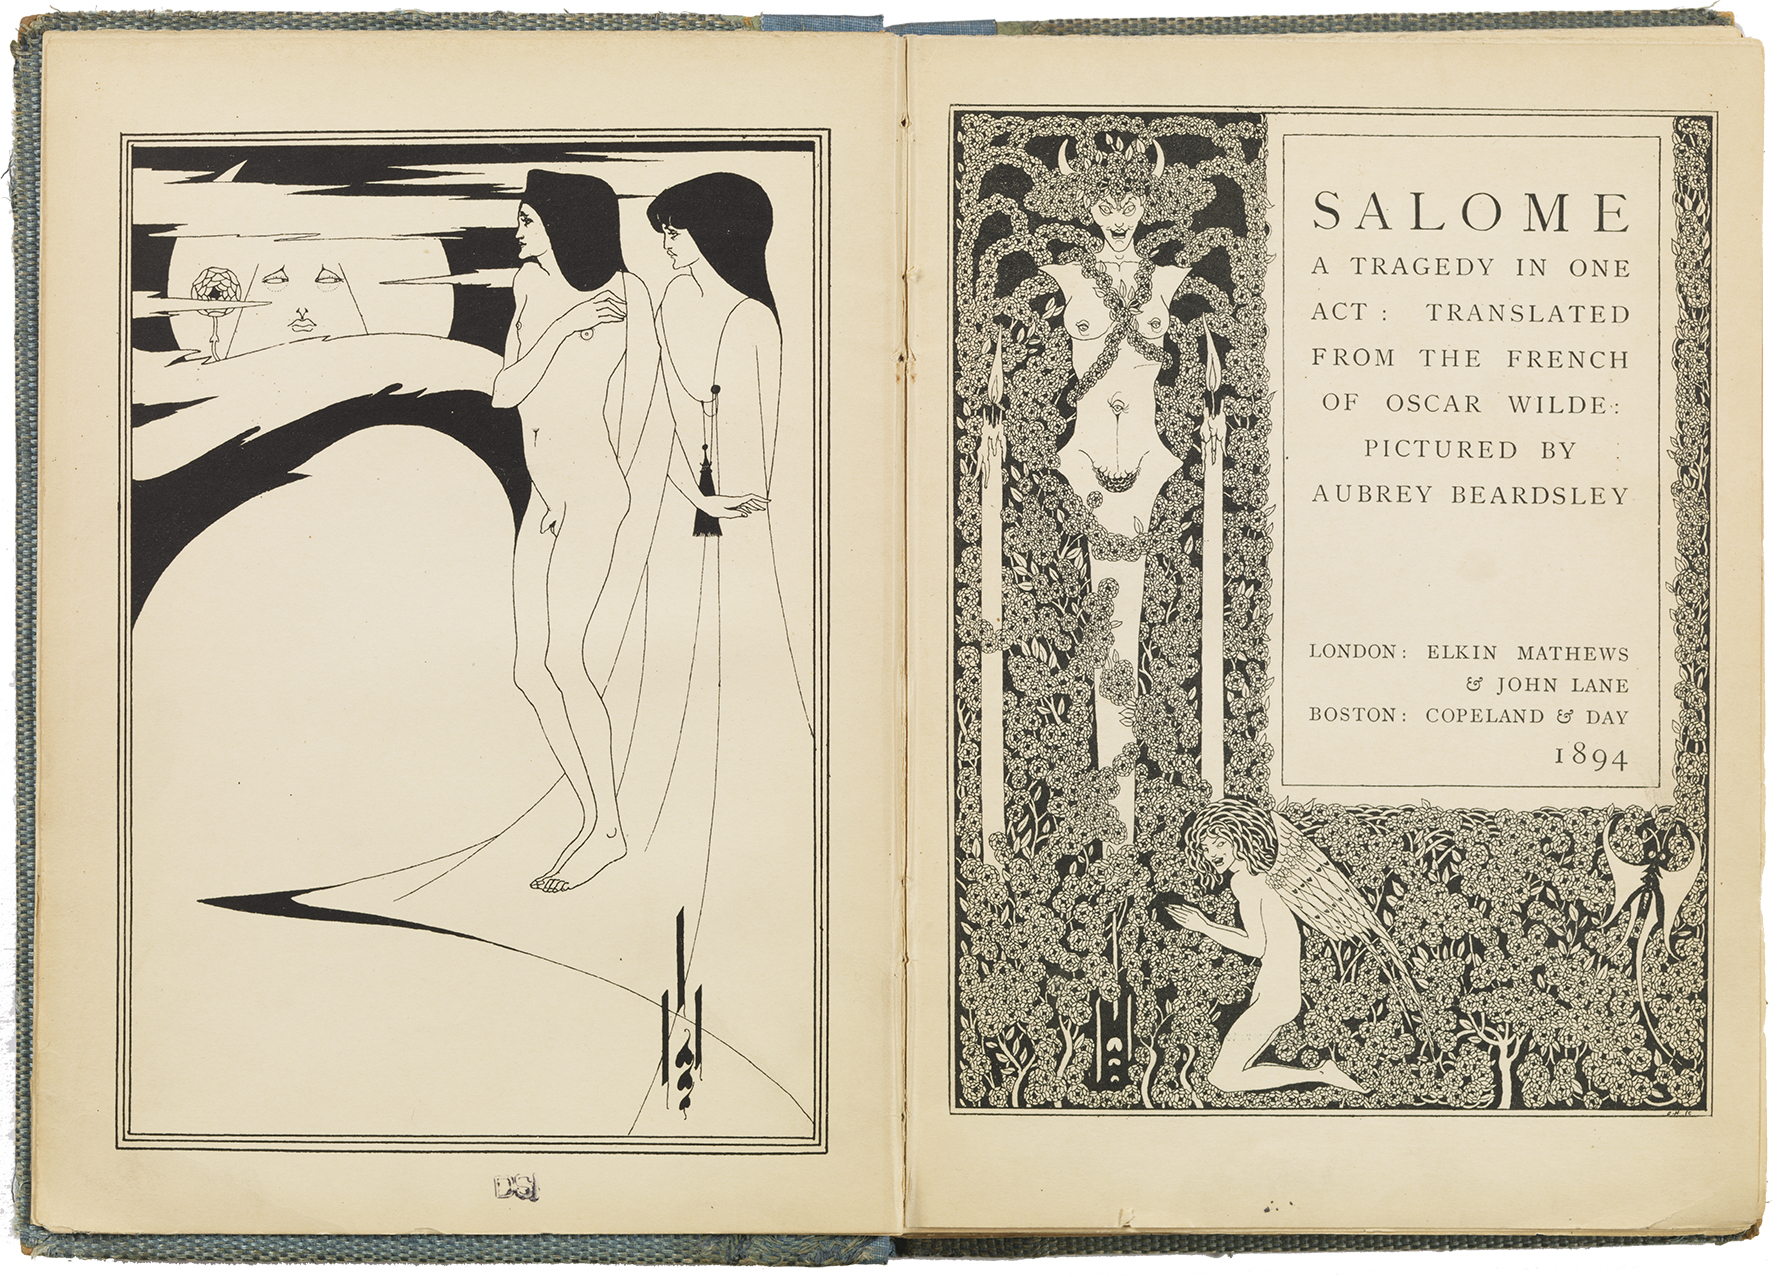 Open spread of an illustrated book. On the left is a full-page black-and-white image of two elongated figures looking at a third figure that resembles a full moon. On the right is the book's title page. Two figures are embedded in intricate foliage. A rectangle with a blank background contains the title: 